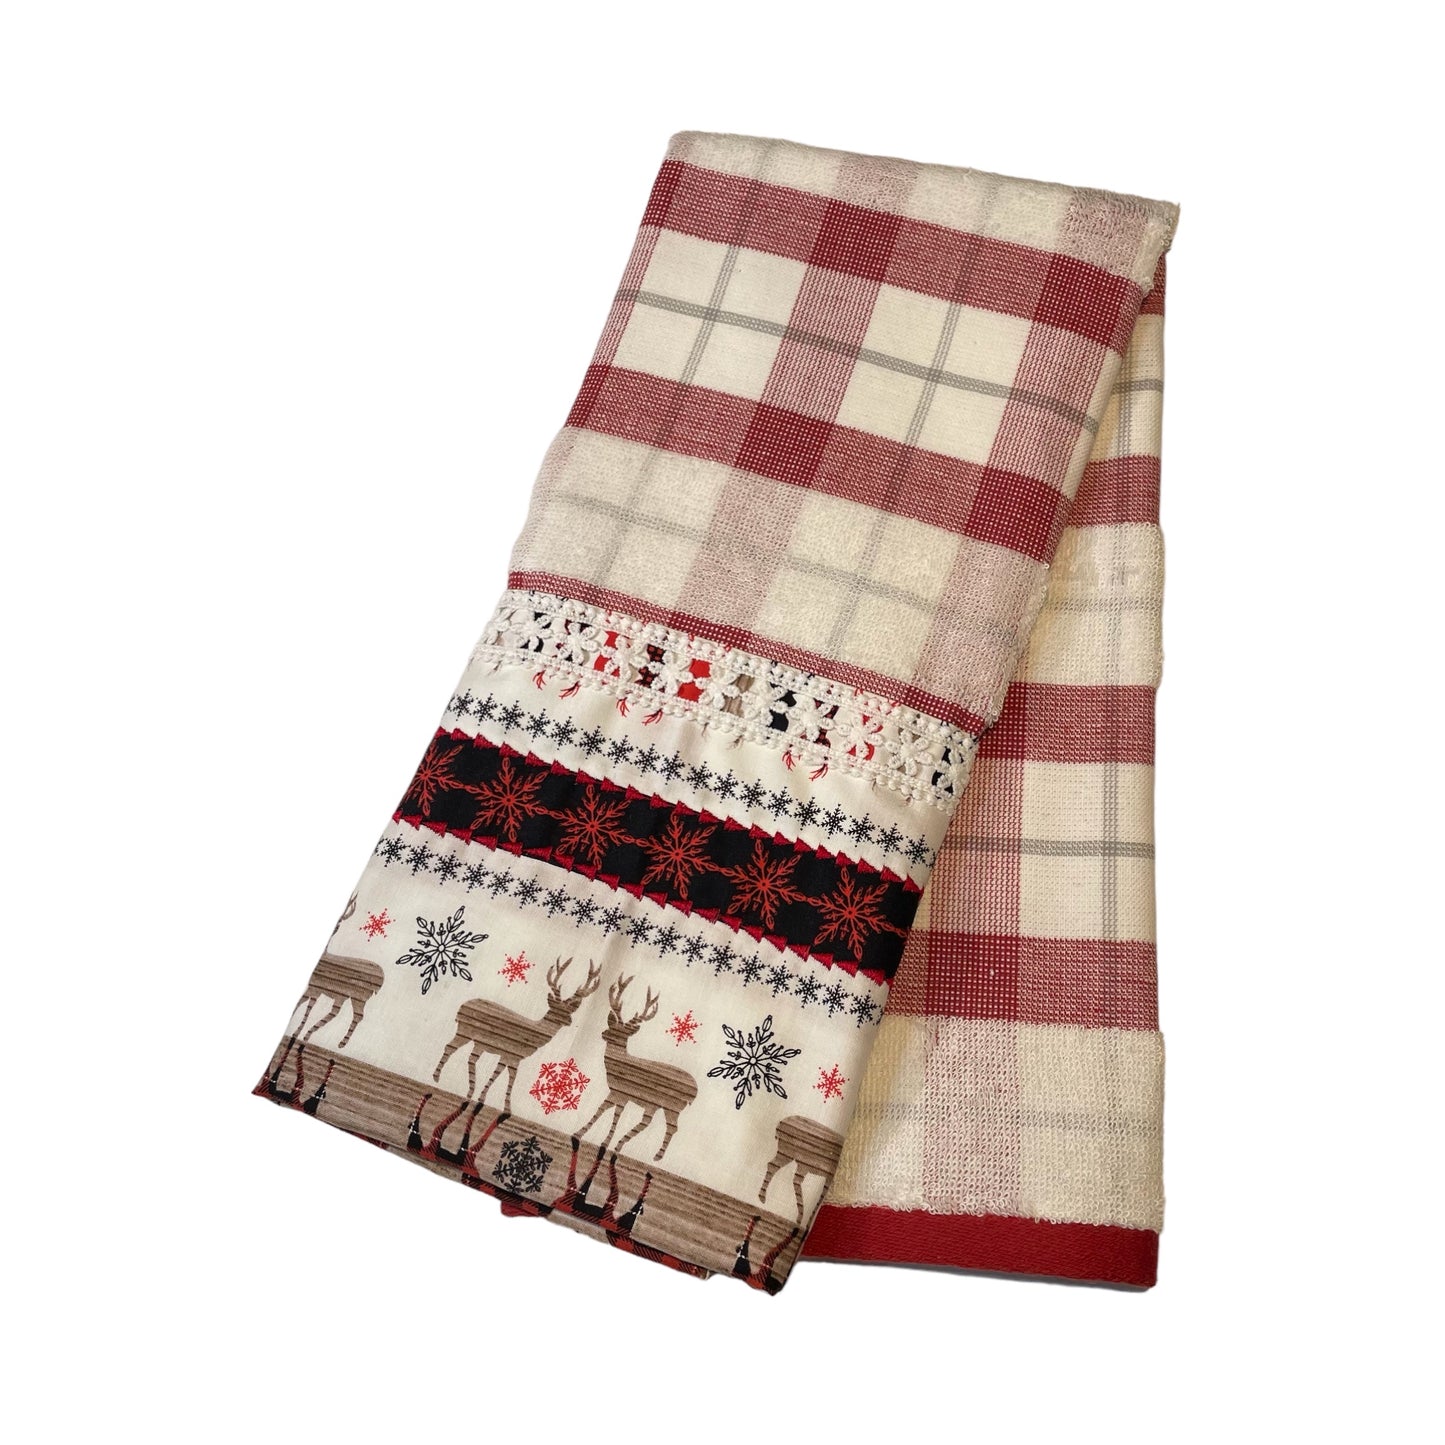 Handcrafted Christmas Red Reindeer Dish Towel with Quilt Cotton Accents and White Lace Trim